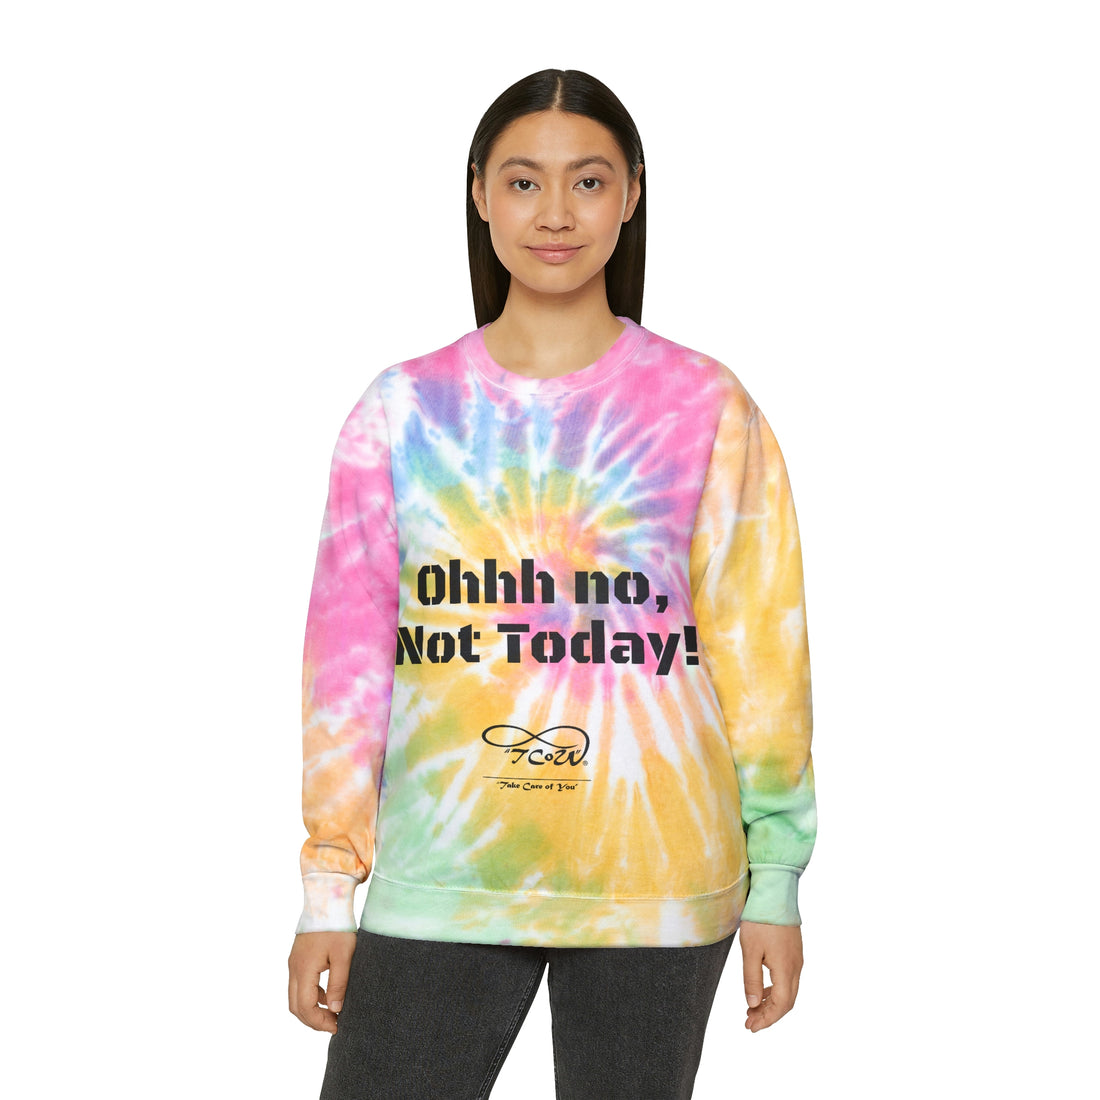 Ohhh no, Not Today!! Today is My Day!! Unisex Tie-Dye Sweatshirt, choose your color